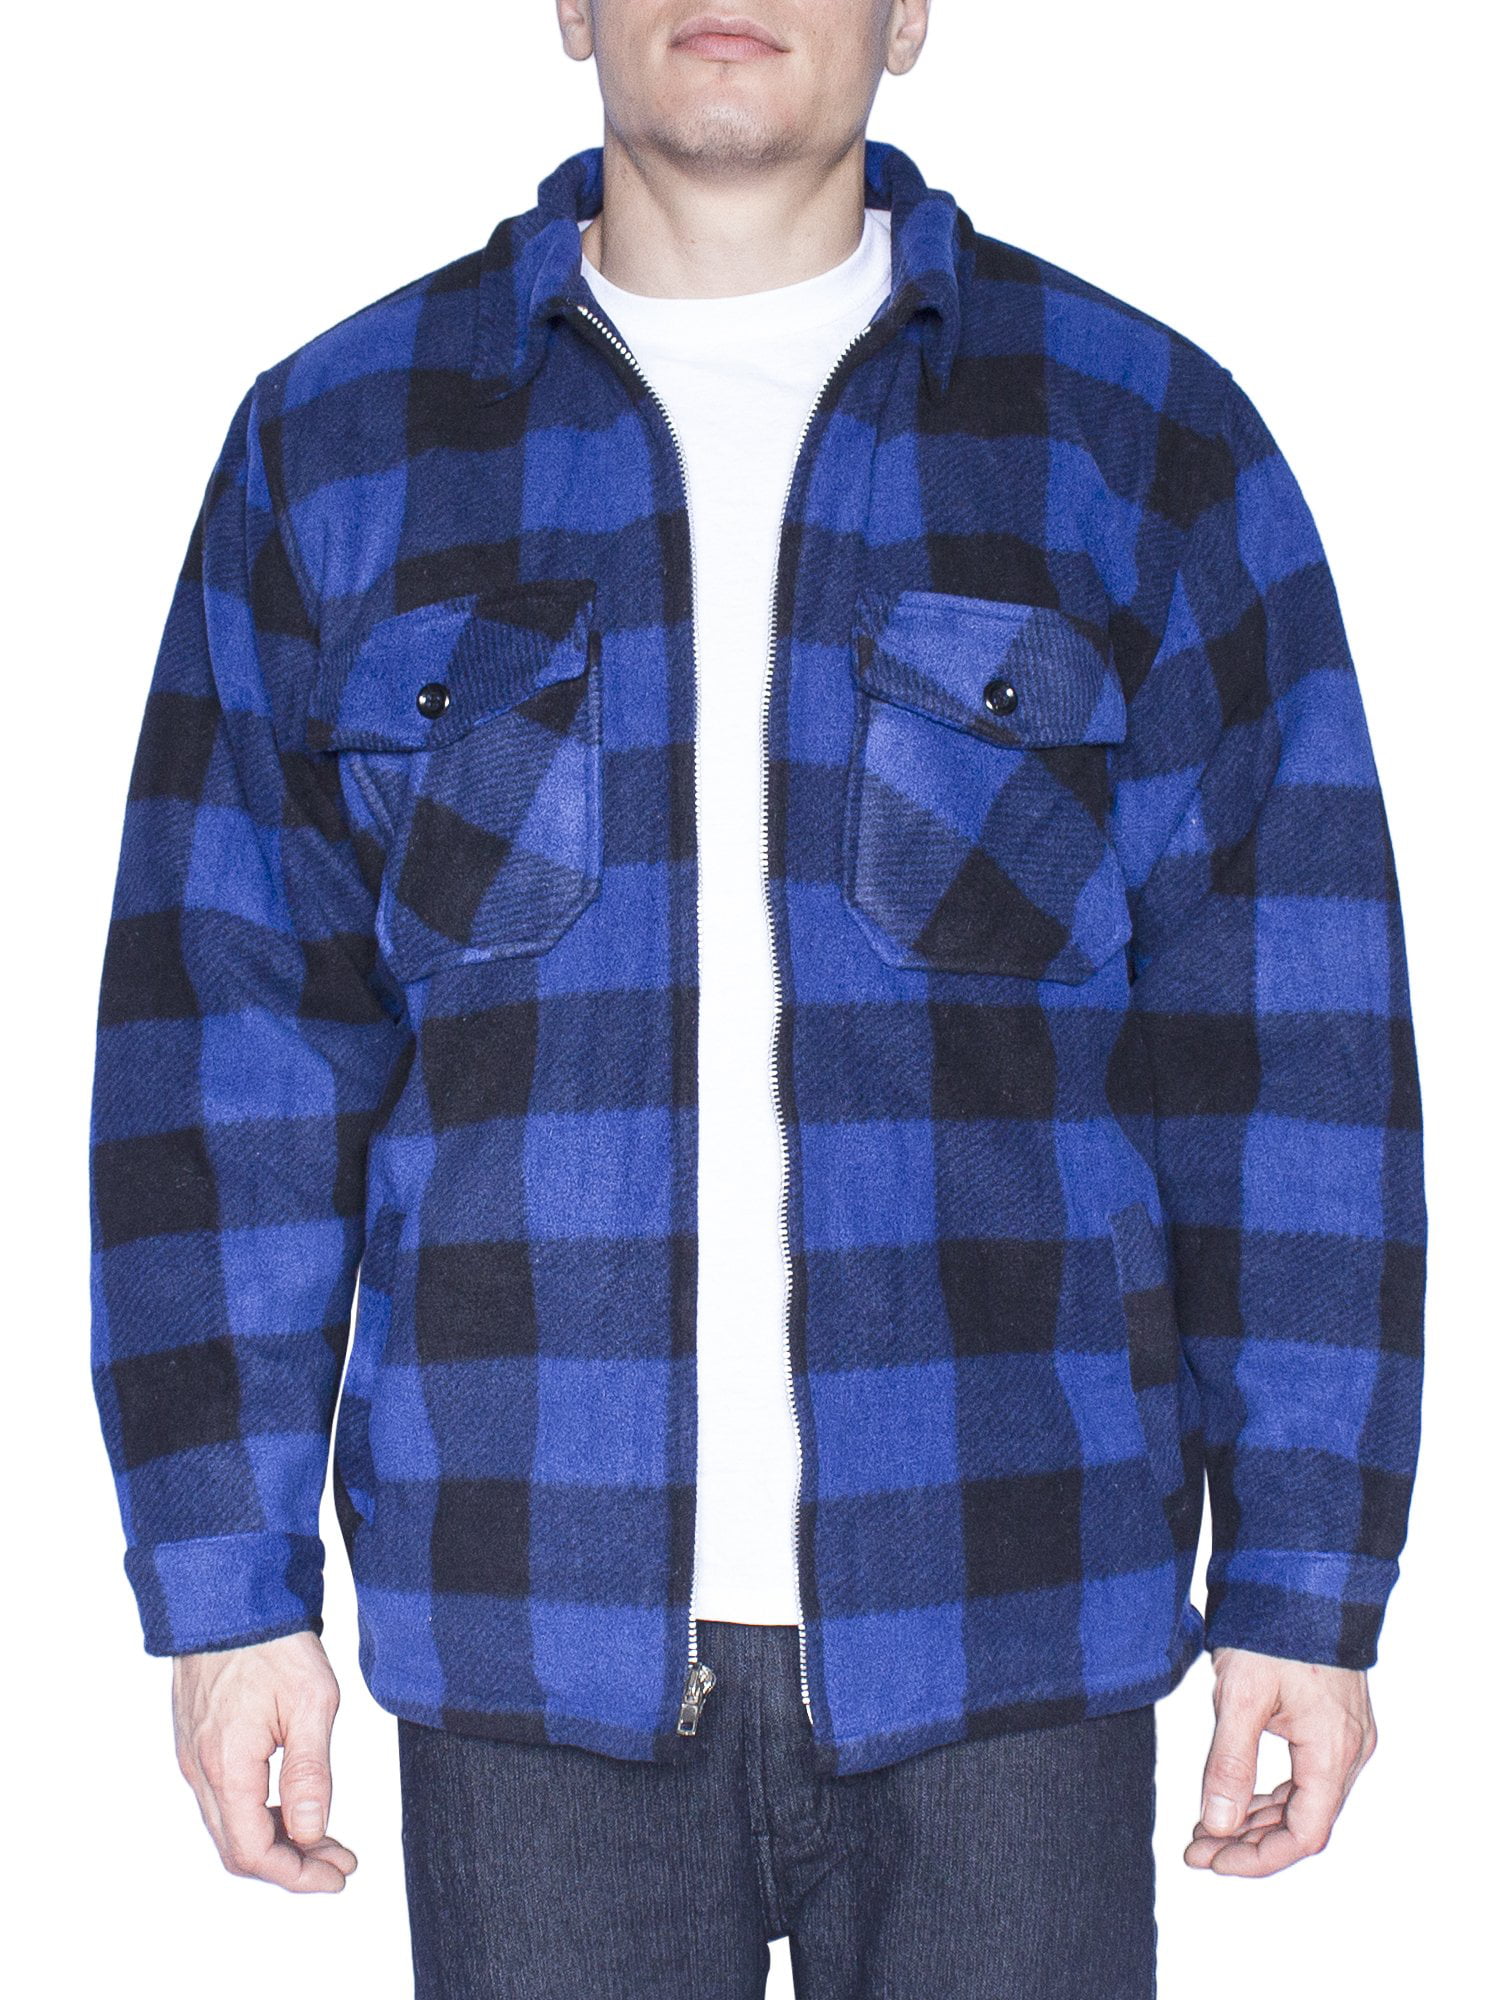 Maxxsel Washed Cotton Canvas Shirt Jacket Lined With Plaid Flannel (S - 3XL)